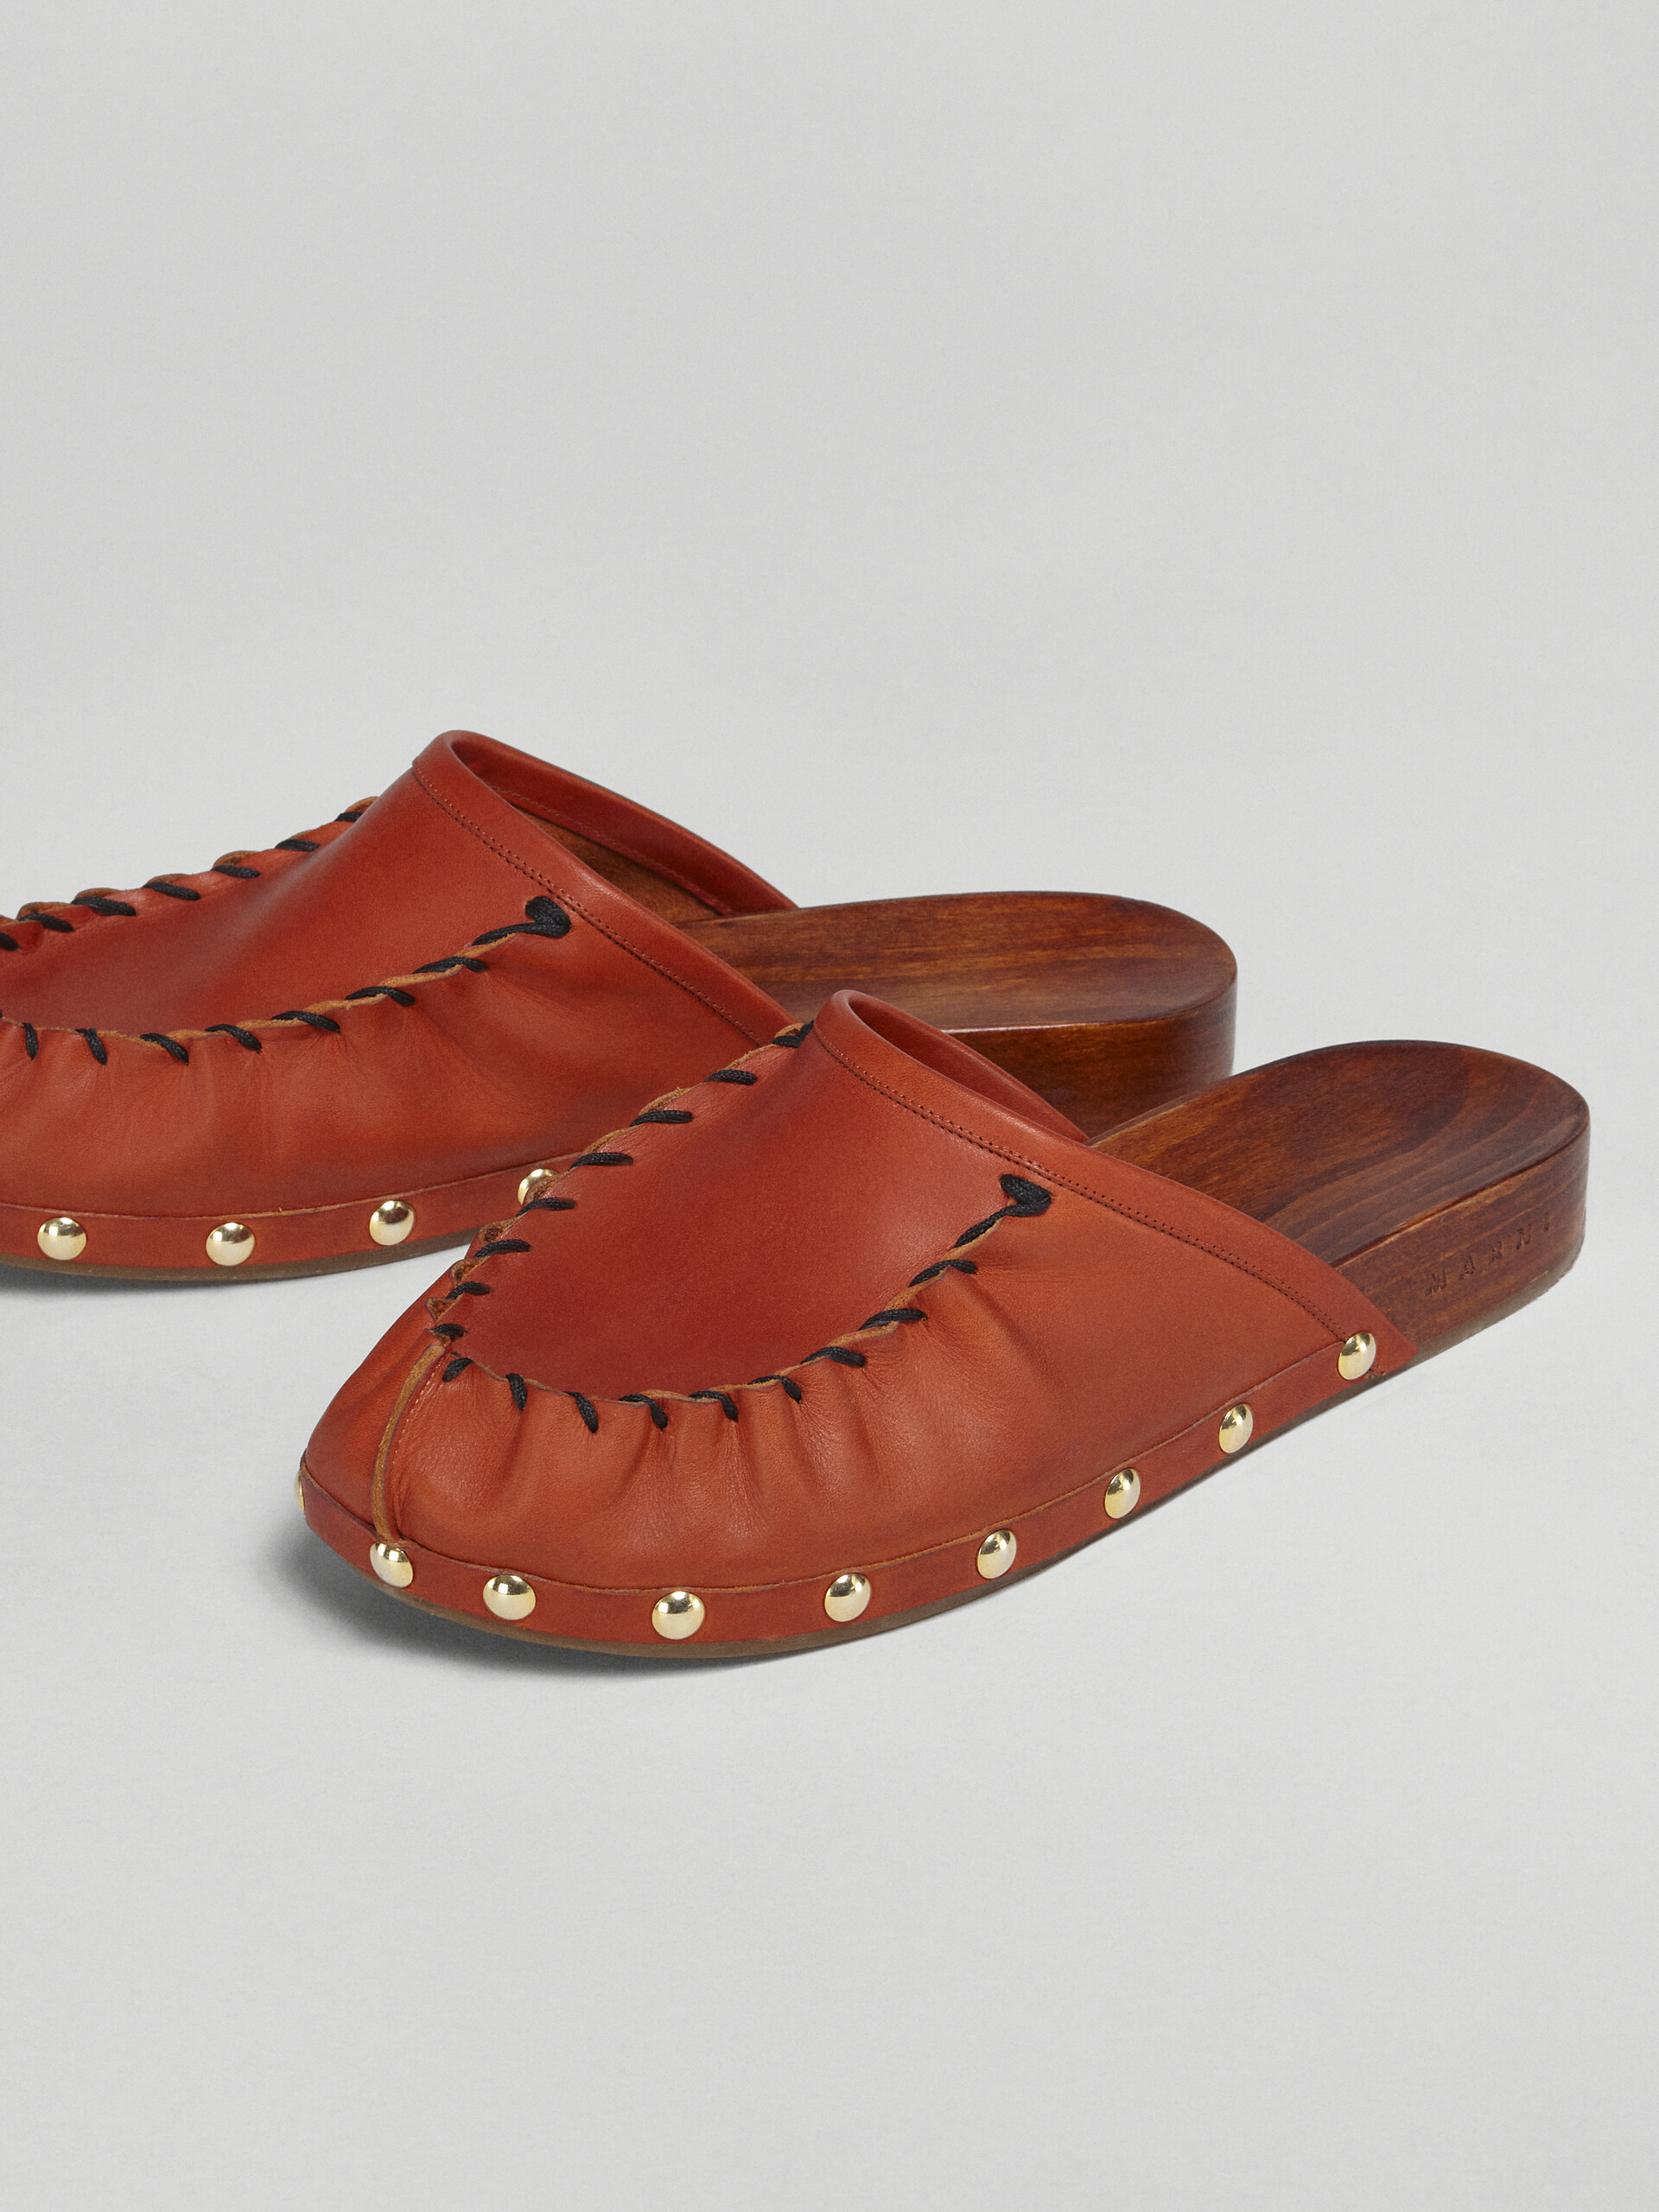 Vegetable-tanned leather and wood clog - Clogs - Image 4